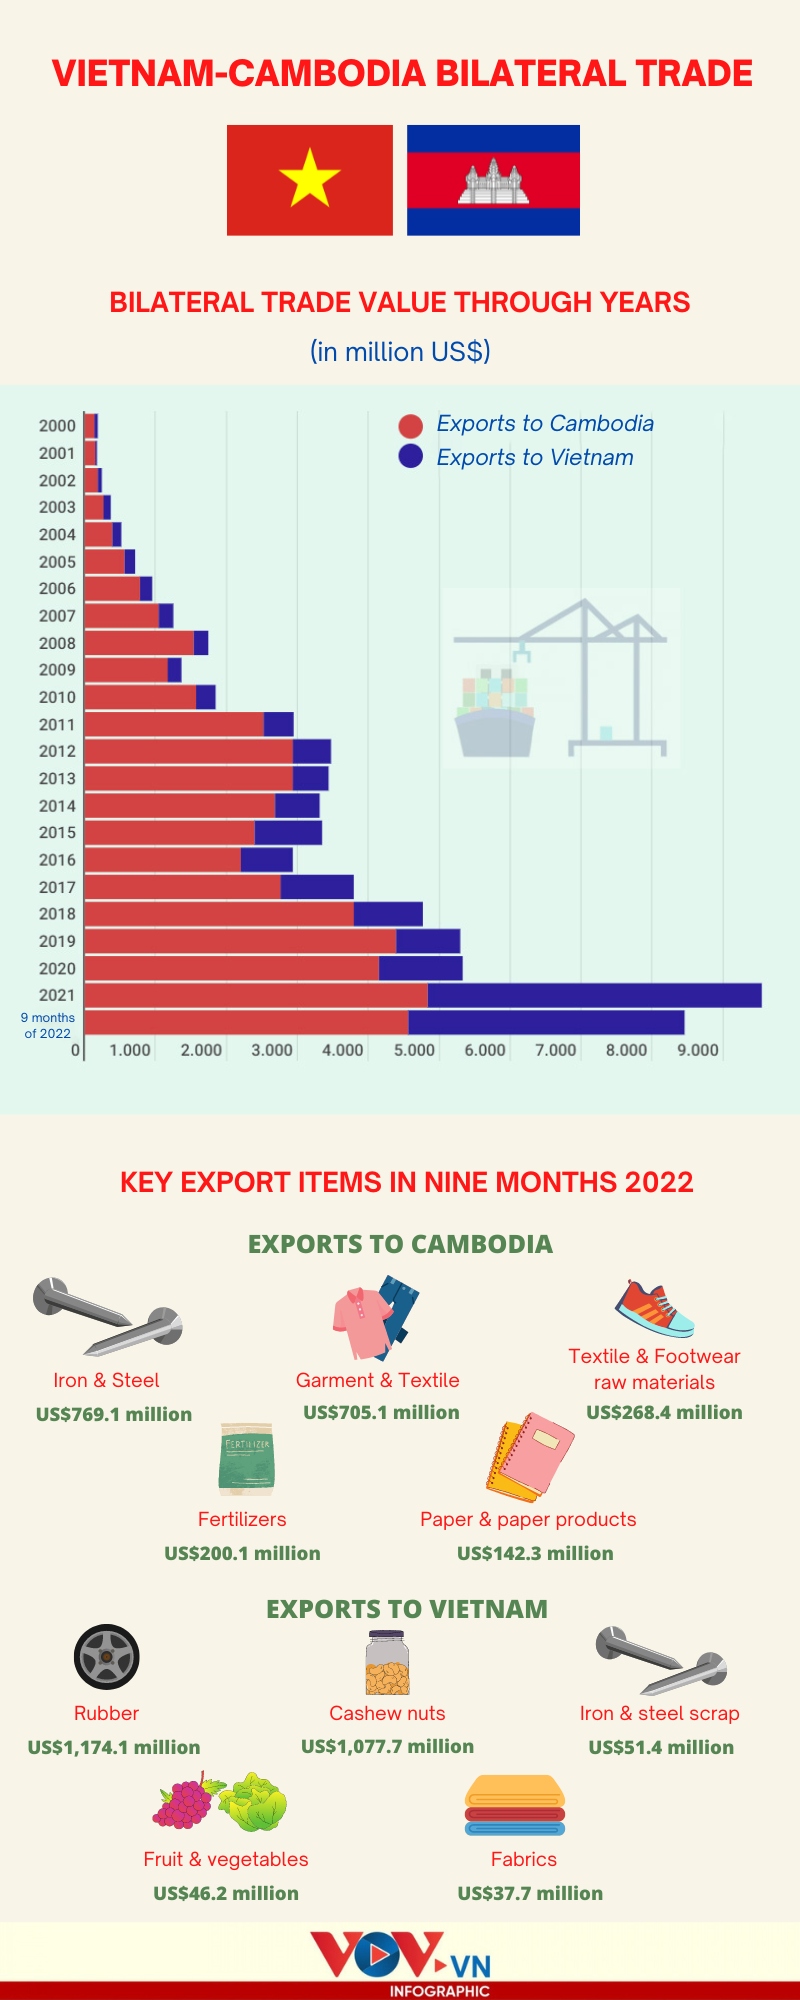 vietnam-cambodia trade records positive growth over years picture 1